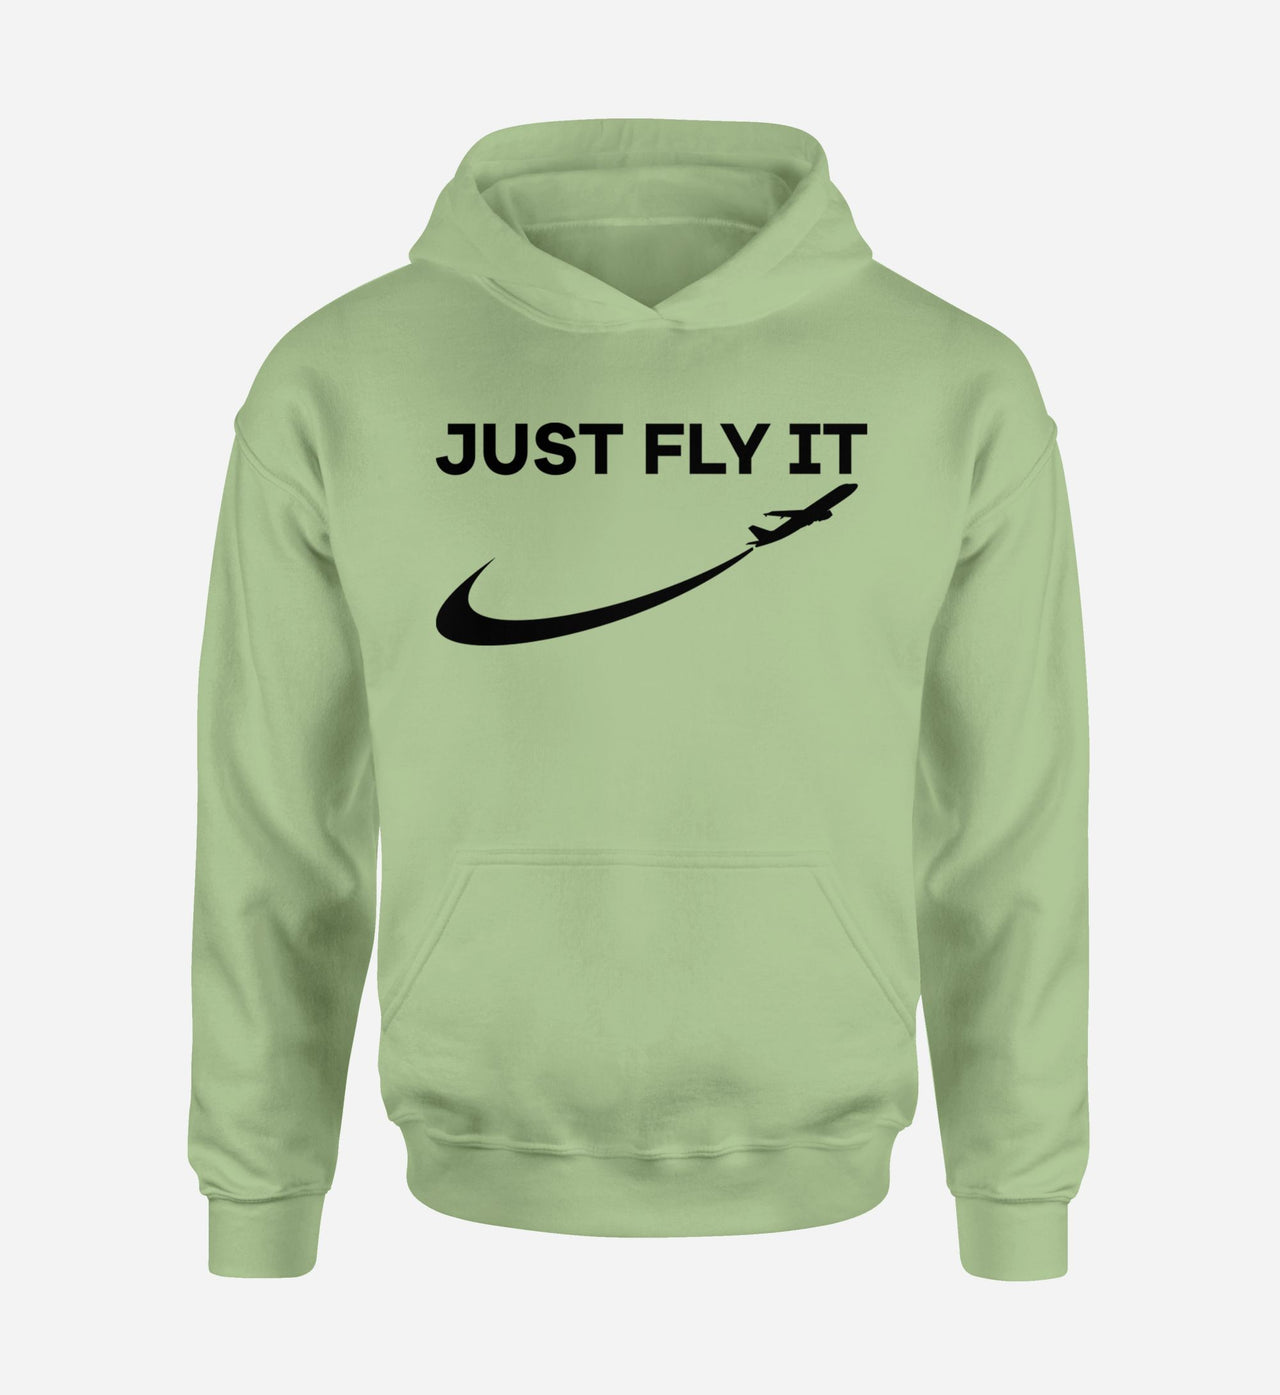 Just Fly It 2 Designed Hoodies